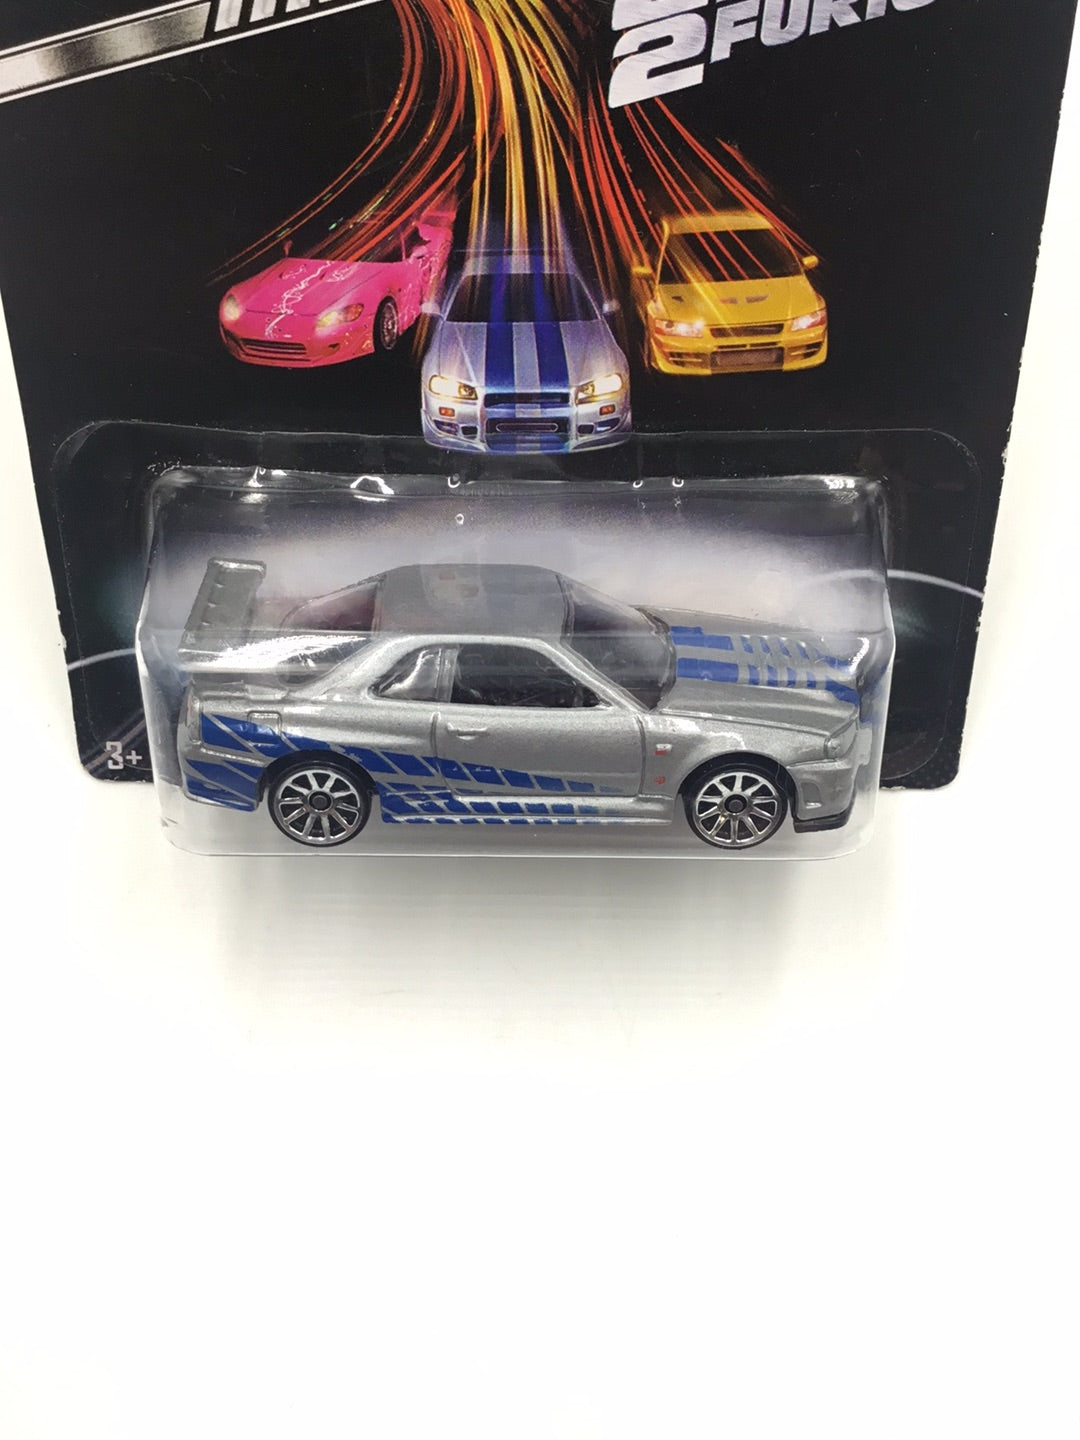 Hot wheels fast and furious Nissan skyline GT-R BNR34 2 fast 2 Furious with Protector 3/8